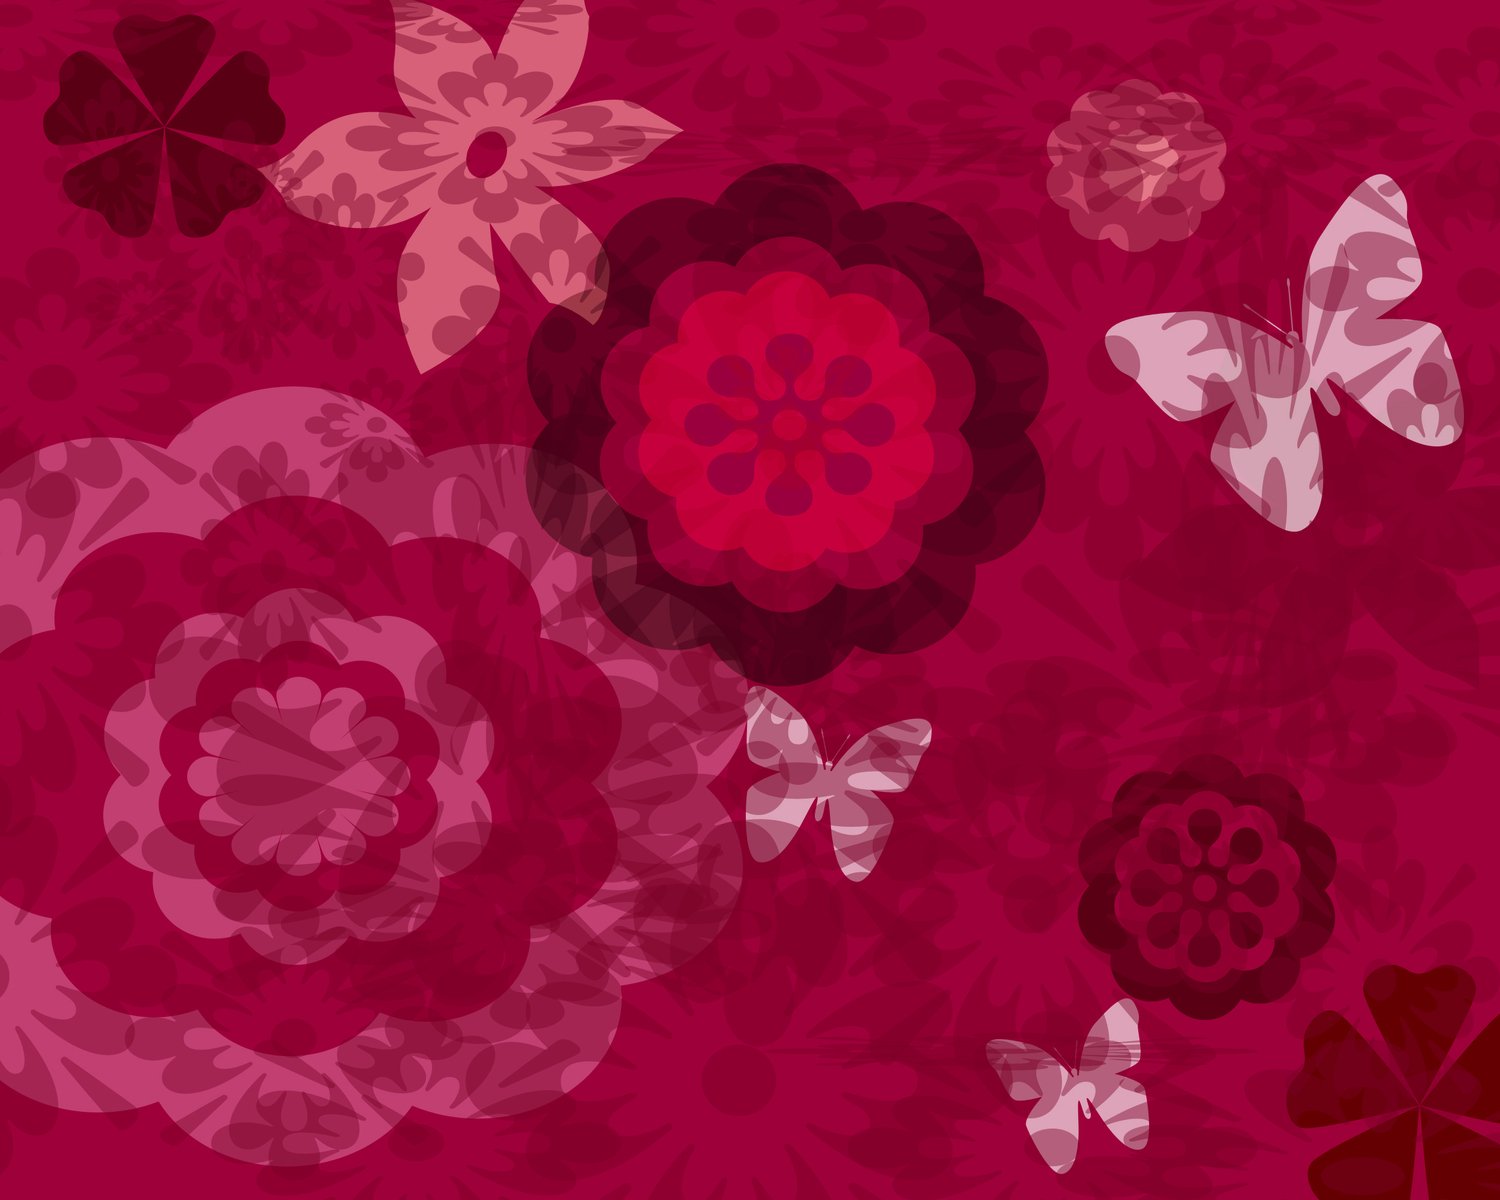 flowers and erflies on a red background